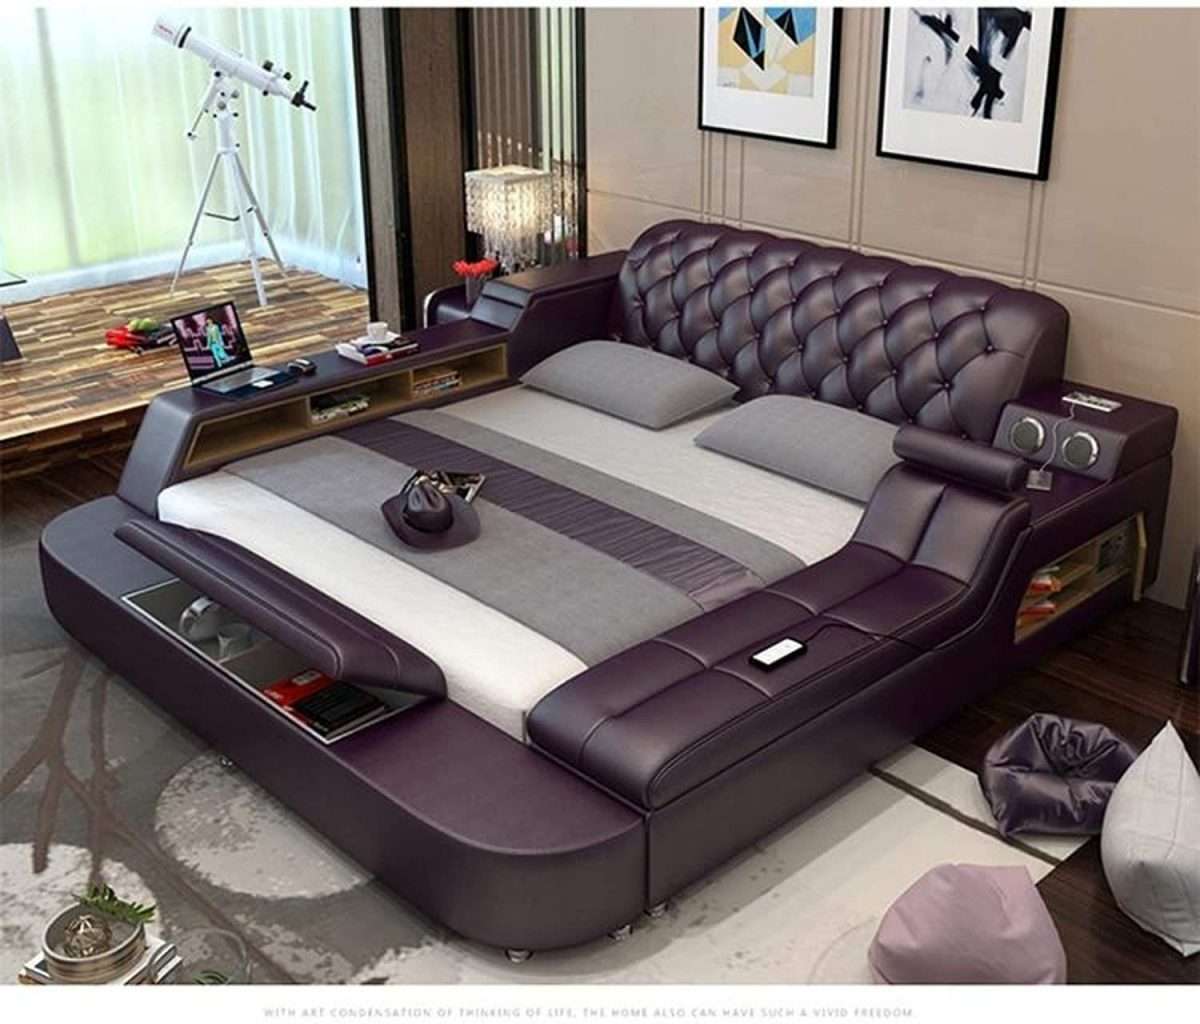 Luxury Smart Bed with a built